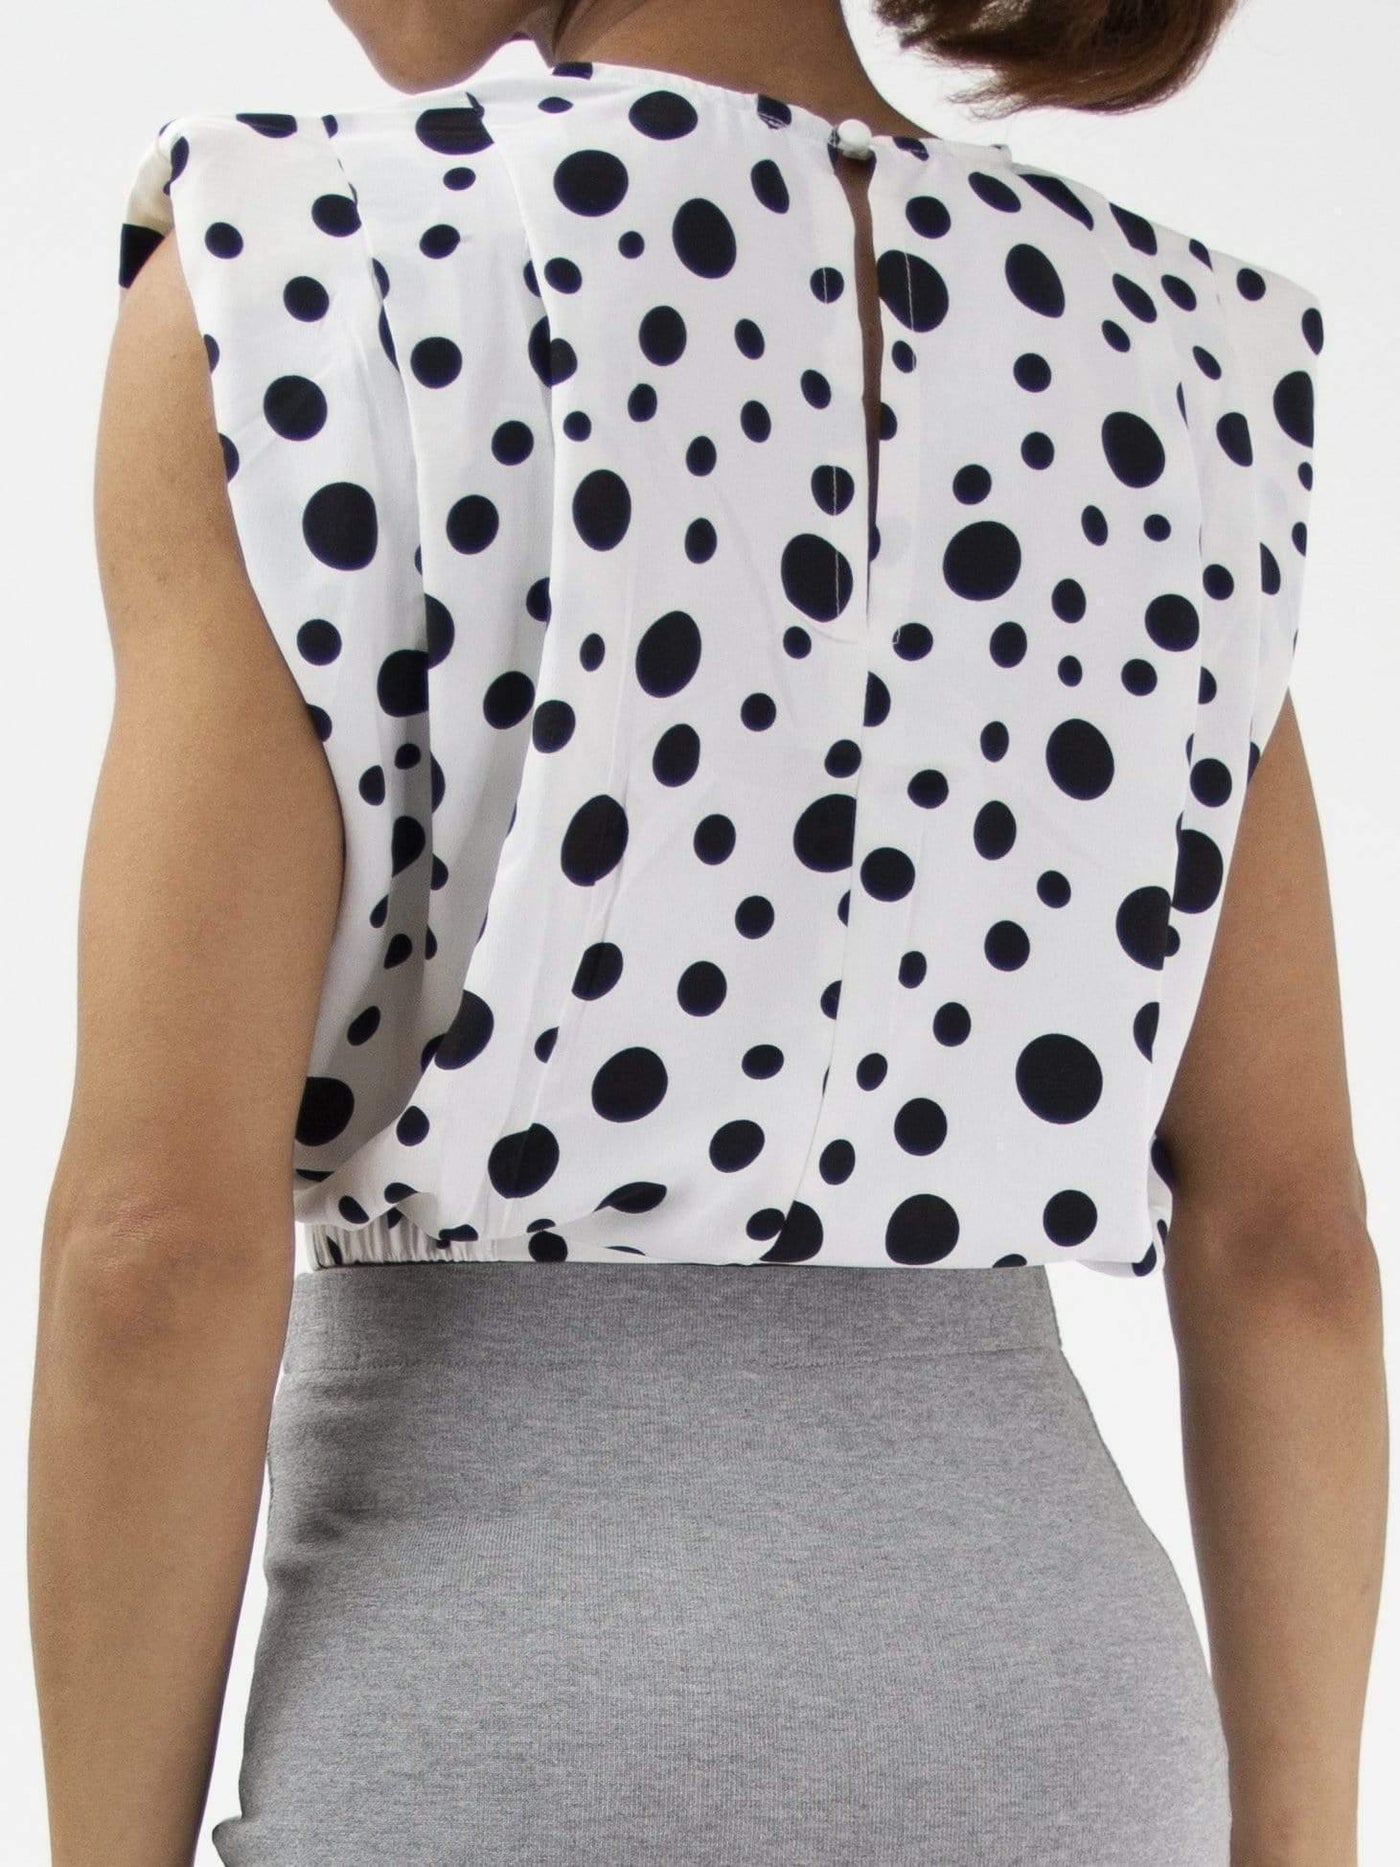 Plastered with Polka | Shoulder Padded White Crop Top - Statement Piece NY _tab_plus-size-size-chart, _tab_size-chart, Brooklyn Boutique, casual, chic, comfy, crop, Crop Top, Crop Tops, final sale, Misses, Monochrome, not clearance, polka, polka dot, Sleeveless, statement, Statement Clothing, statement piece, Statement Piece Boutique, statement piece ny, Statement Pieces, Statement Pieces Boutique, statement top, statement tops, top, tops, White, Women's Boutique, work, work wear, Workwear Statement Tops